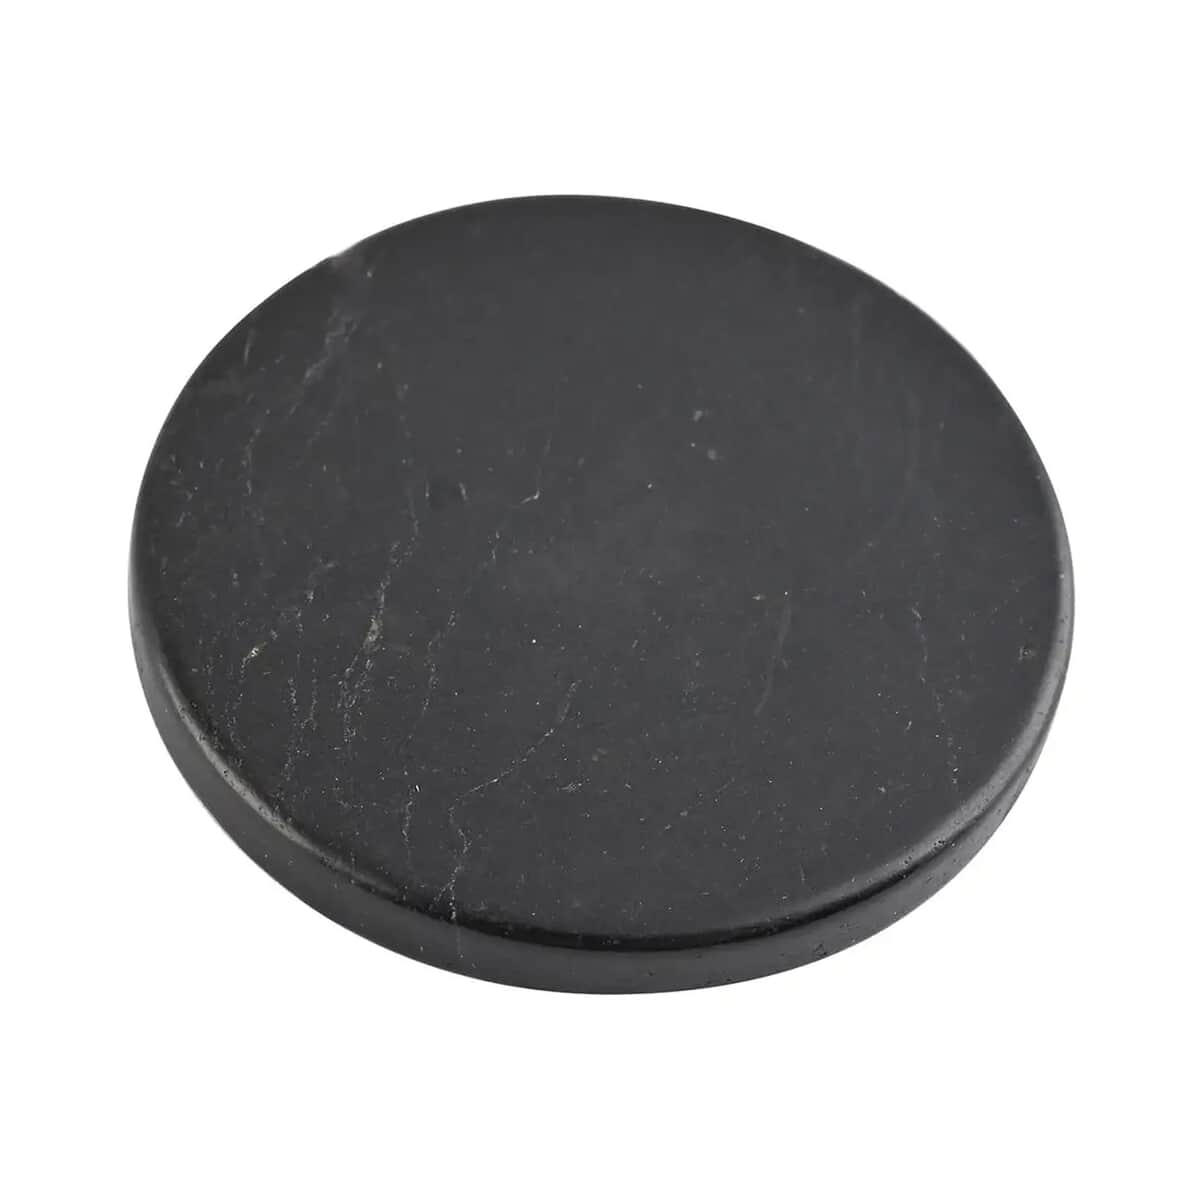 Shungite Plain Round Cellphone Large Tile, Decorative Black Mineral Tile for Mobile Phones 1.25 Approx. 35ctw image number 3